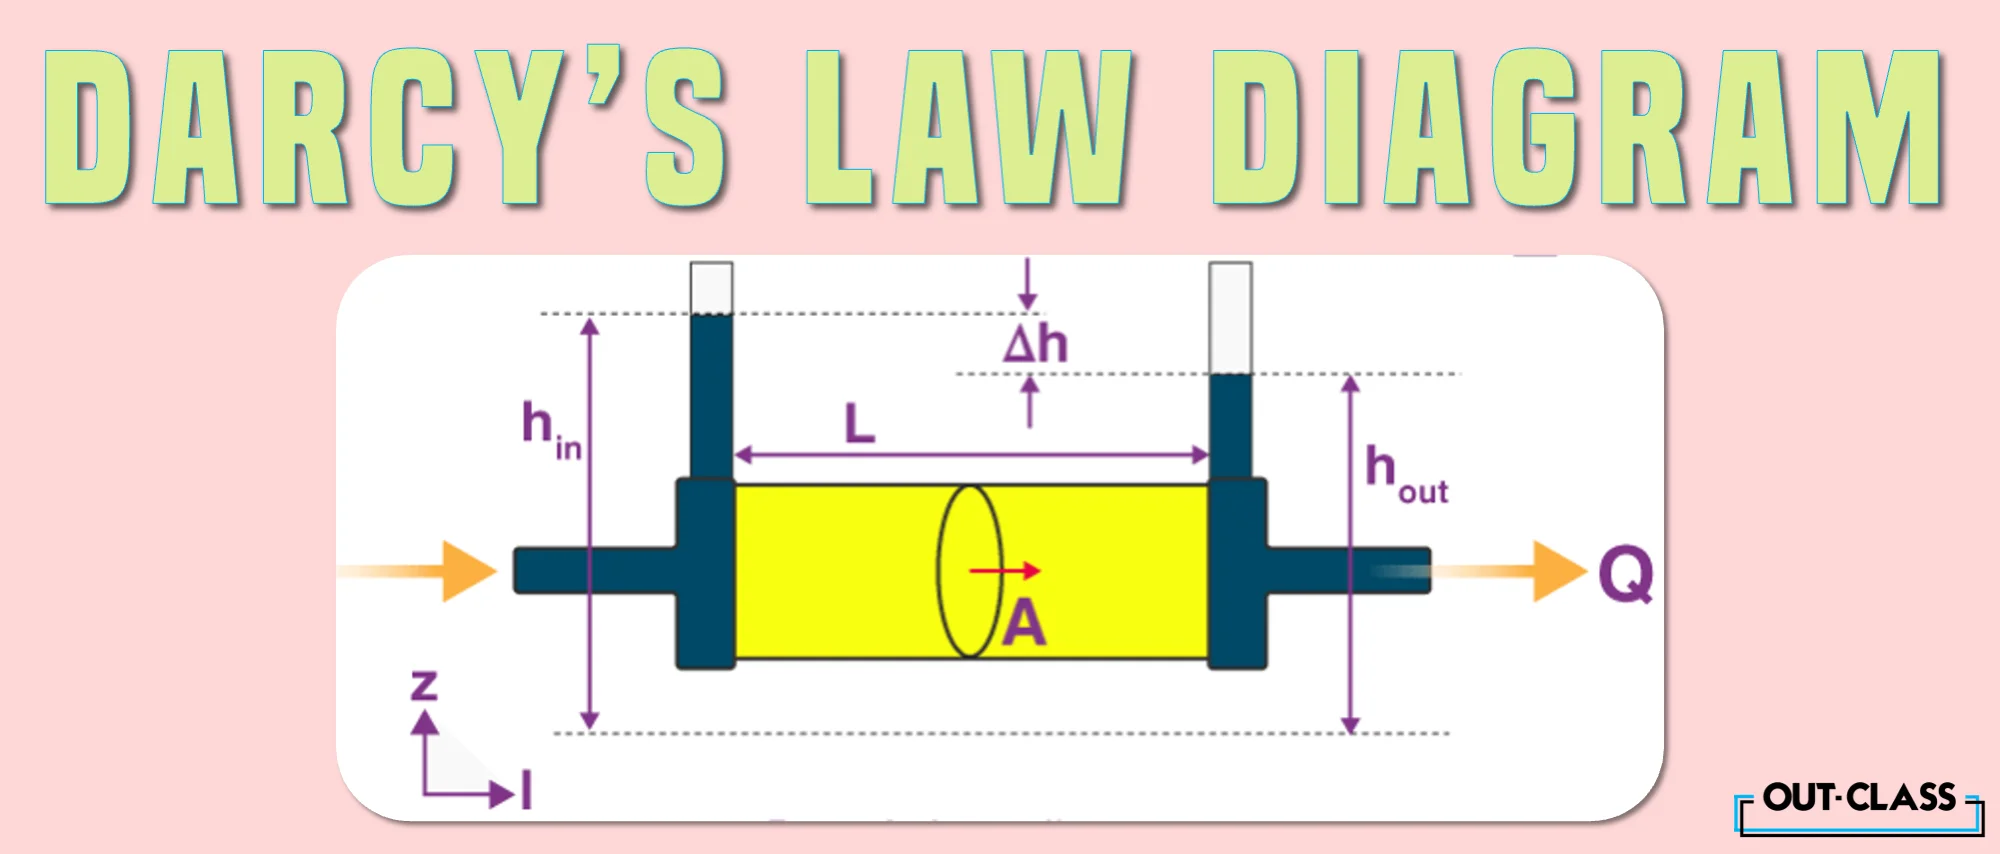 Darcy's law with darcy's law equation examples and darcy's law derivation and equation are provided. It ends by explaining the limitations of darcy's law.